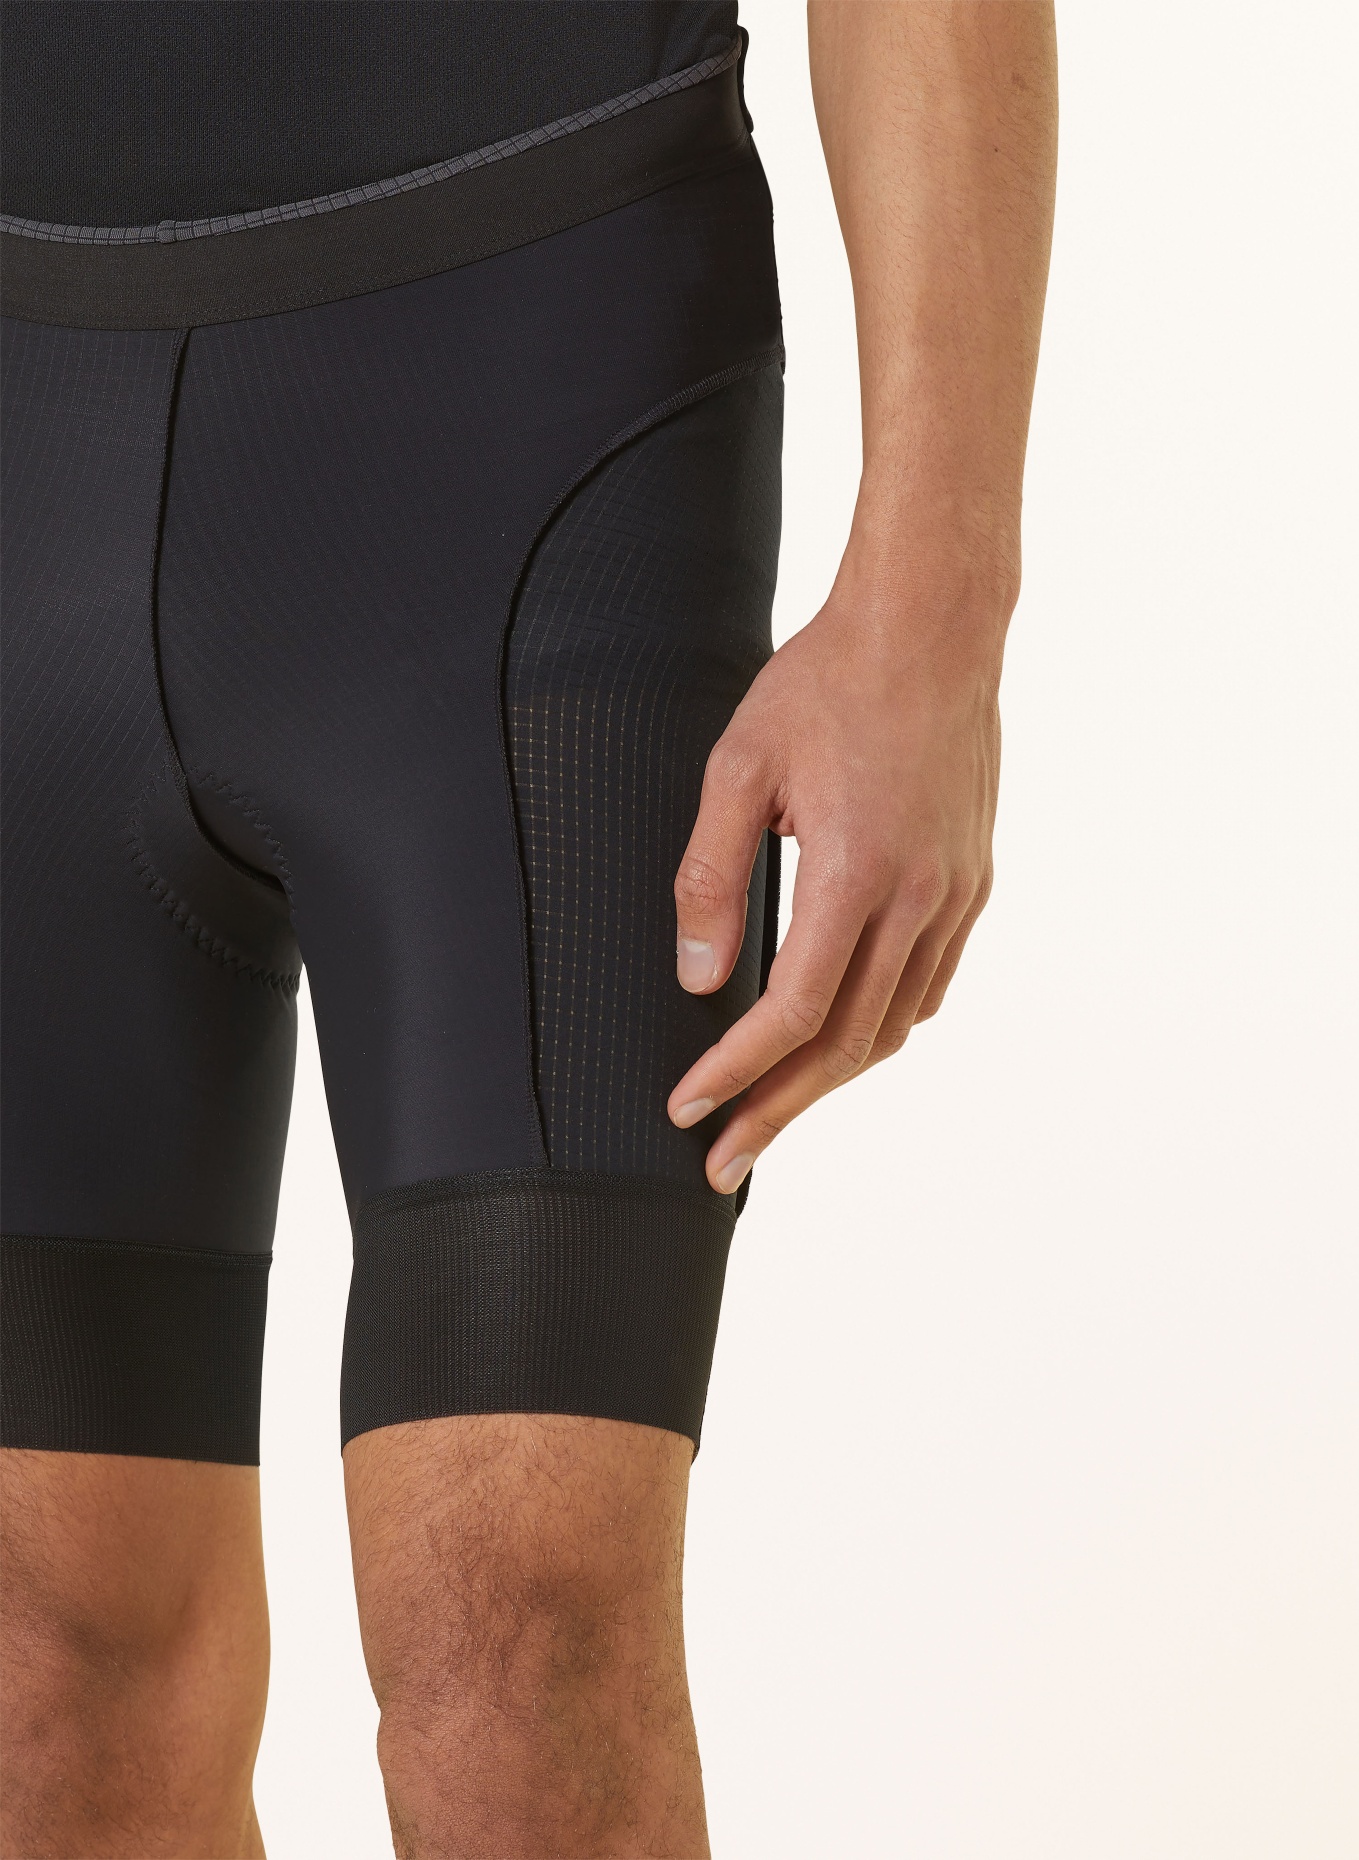 SPECIALIZED Cycling undershorts PRIME SWAT LINER with padded insert, Color: BLACK (Image 5)